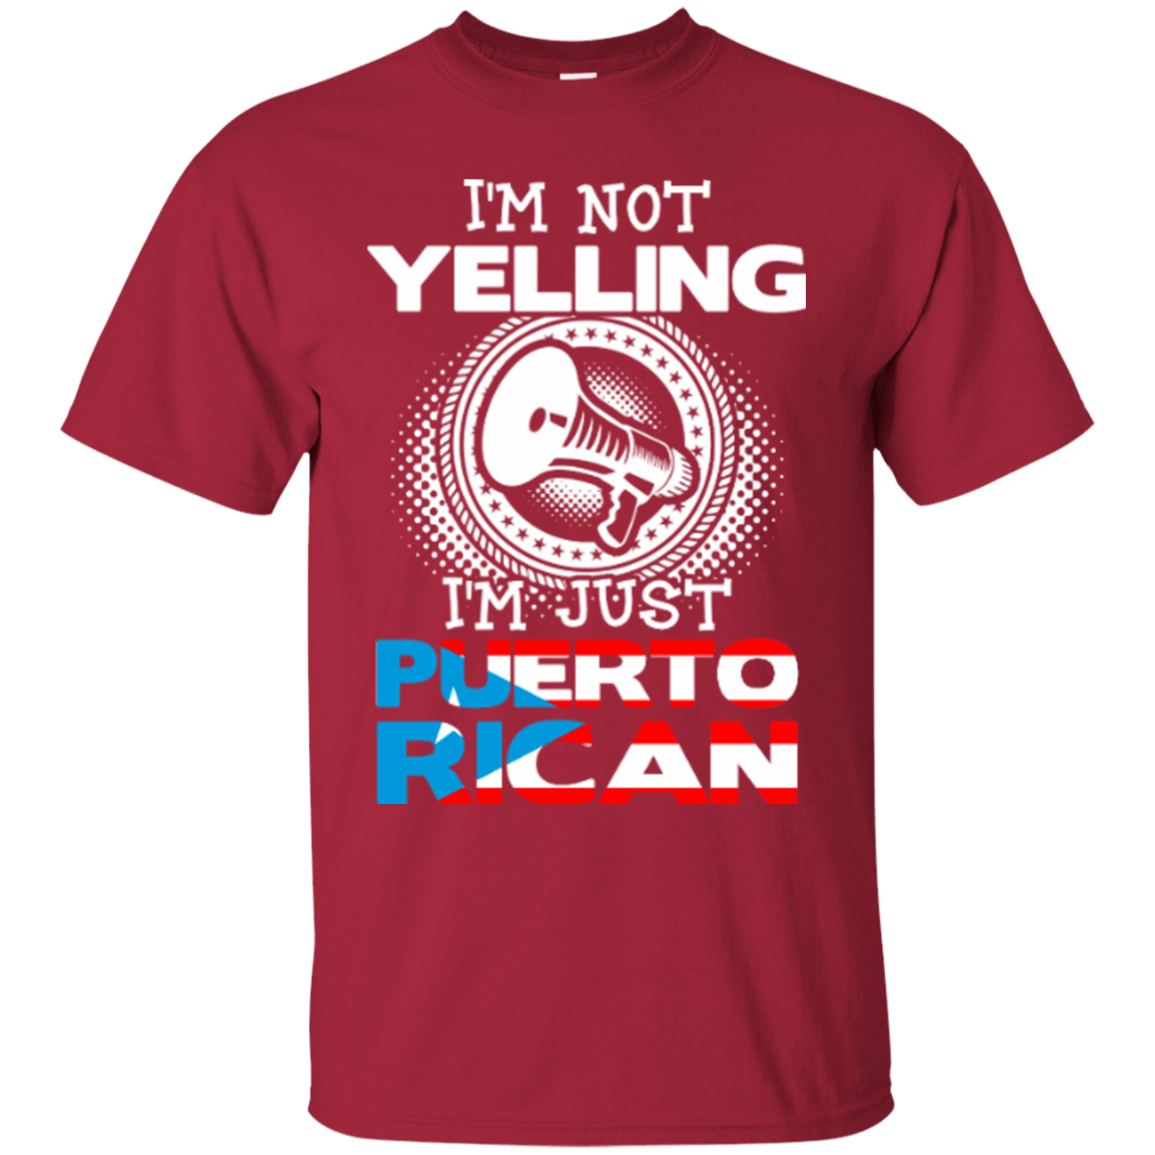 Youth Tee - Not Yelling, Just Puerto Rican - Youth Tee